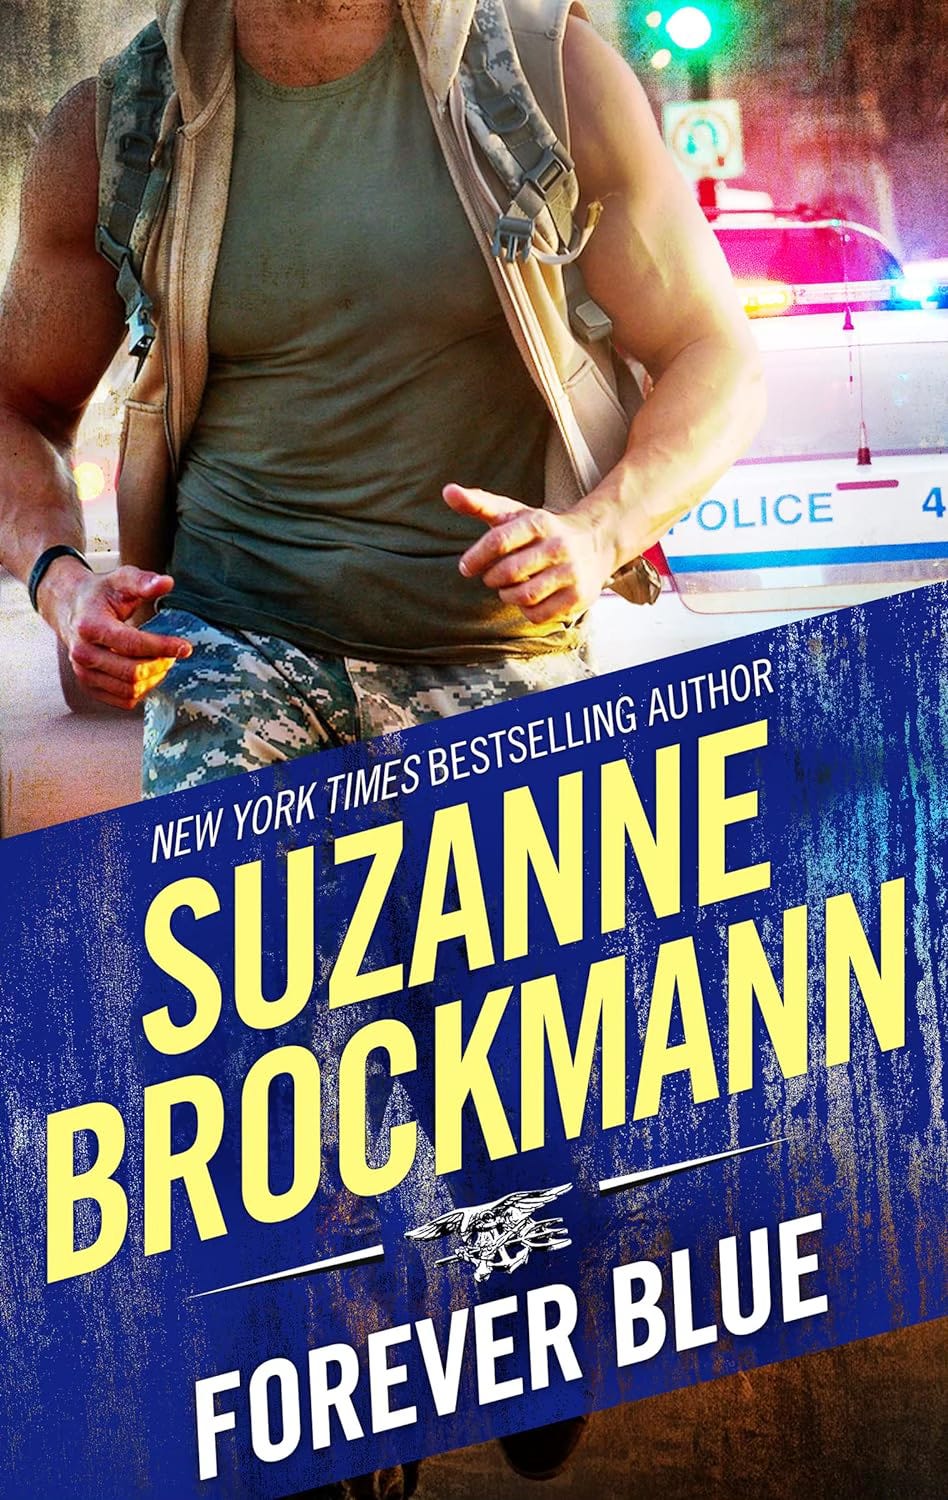 Cover for FOREVER BLUE by New York Times Bestselling Author Suzanne Brockmann features a man in cammo running. We cannot see his face.